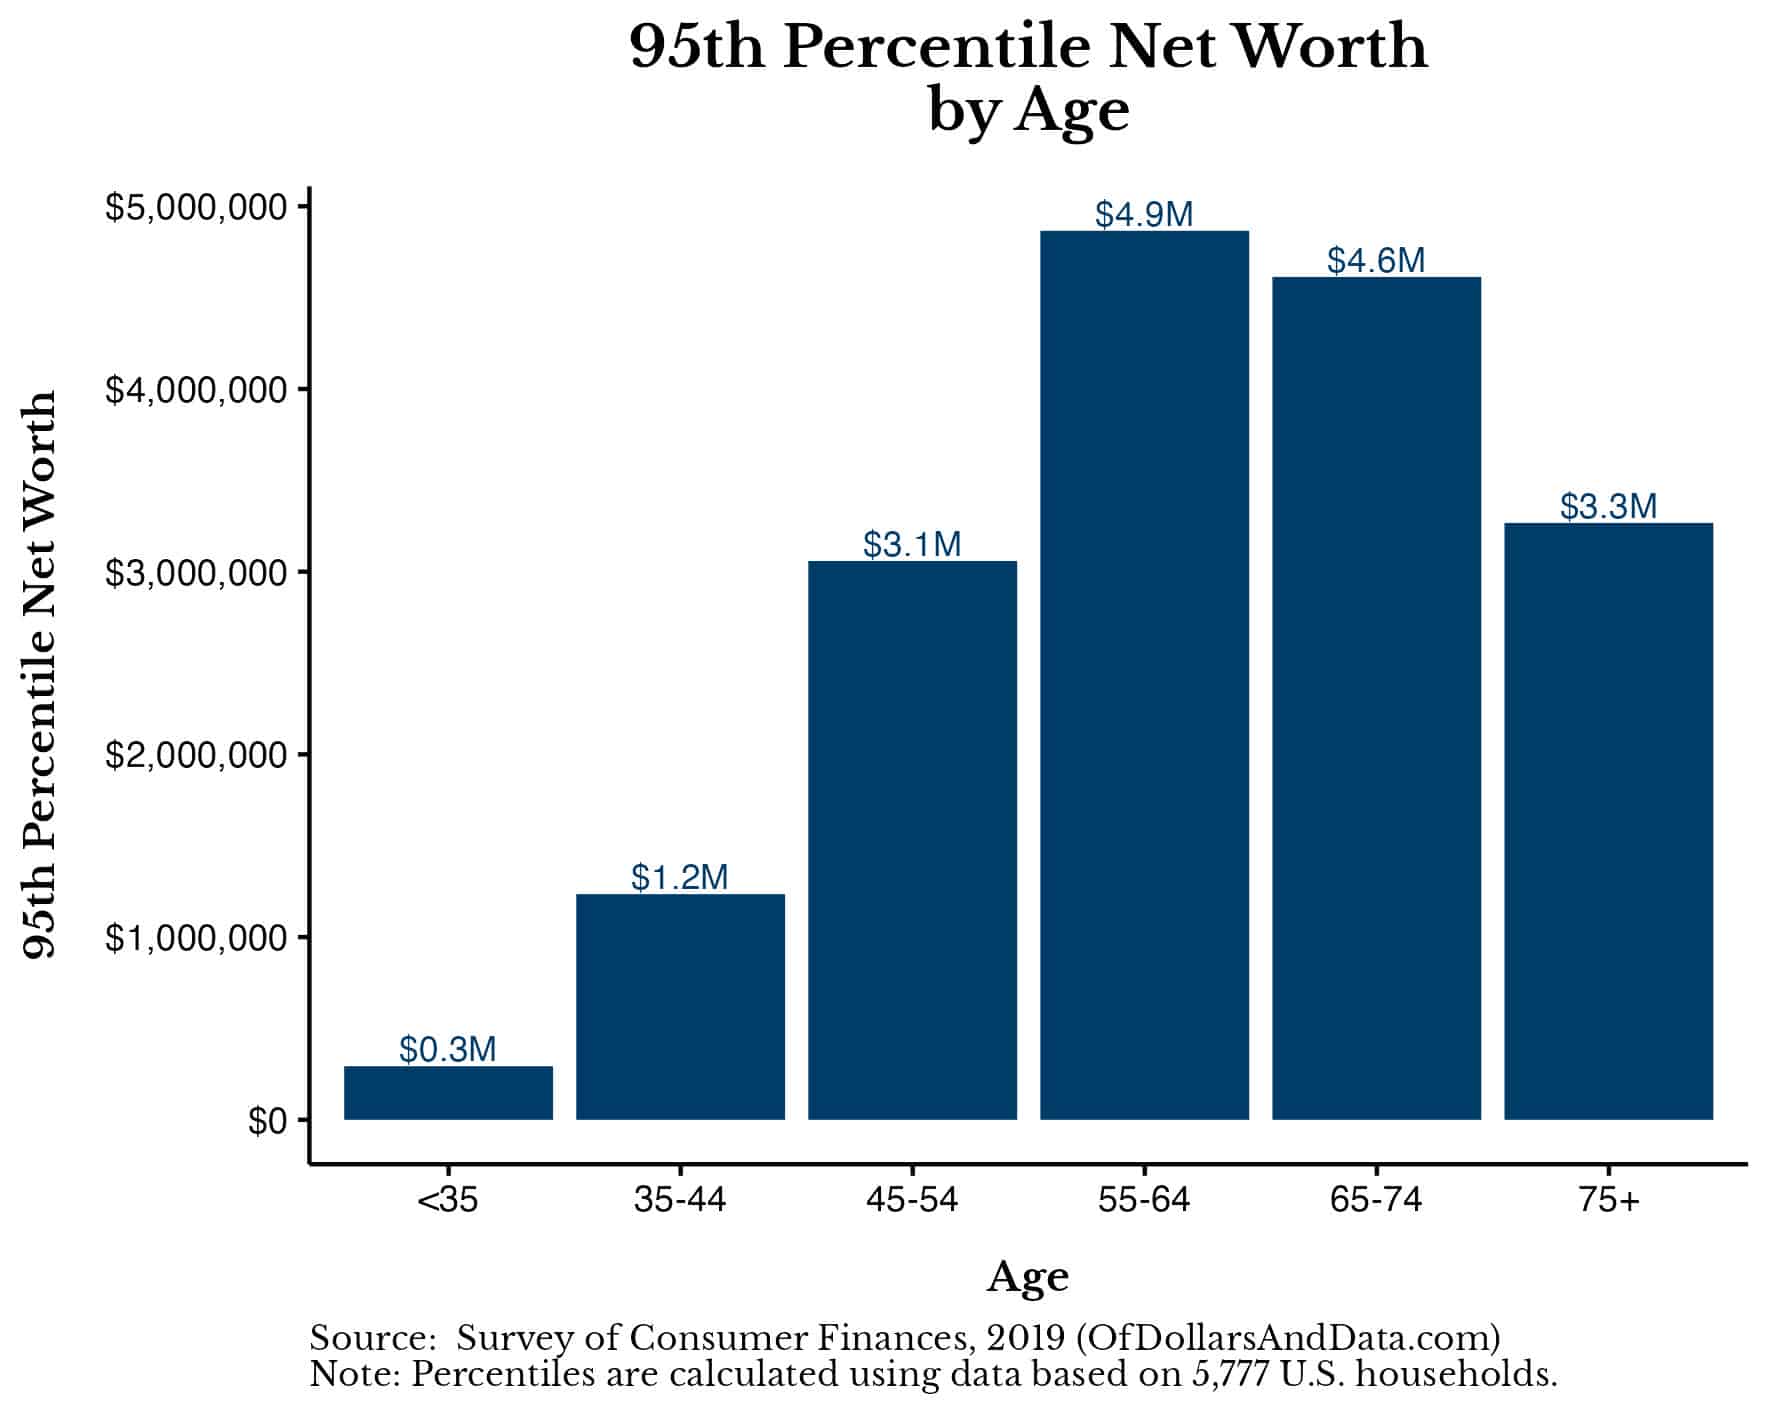 Chart of U.S. household net worth by age at the 95th percentile using the 2019 Survey of Consumer Finances data.